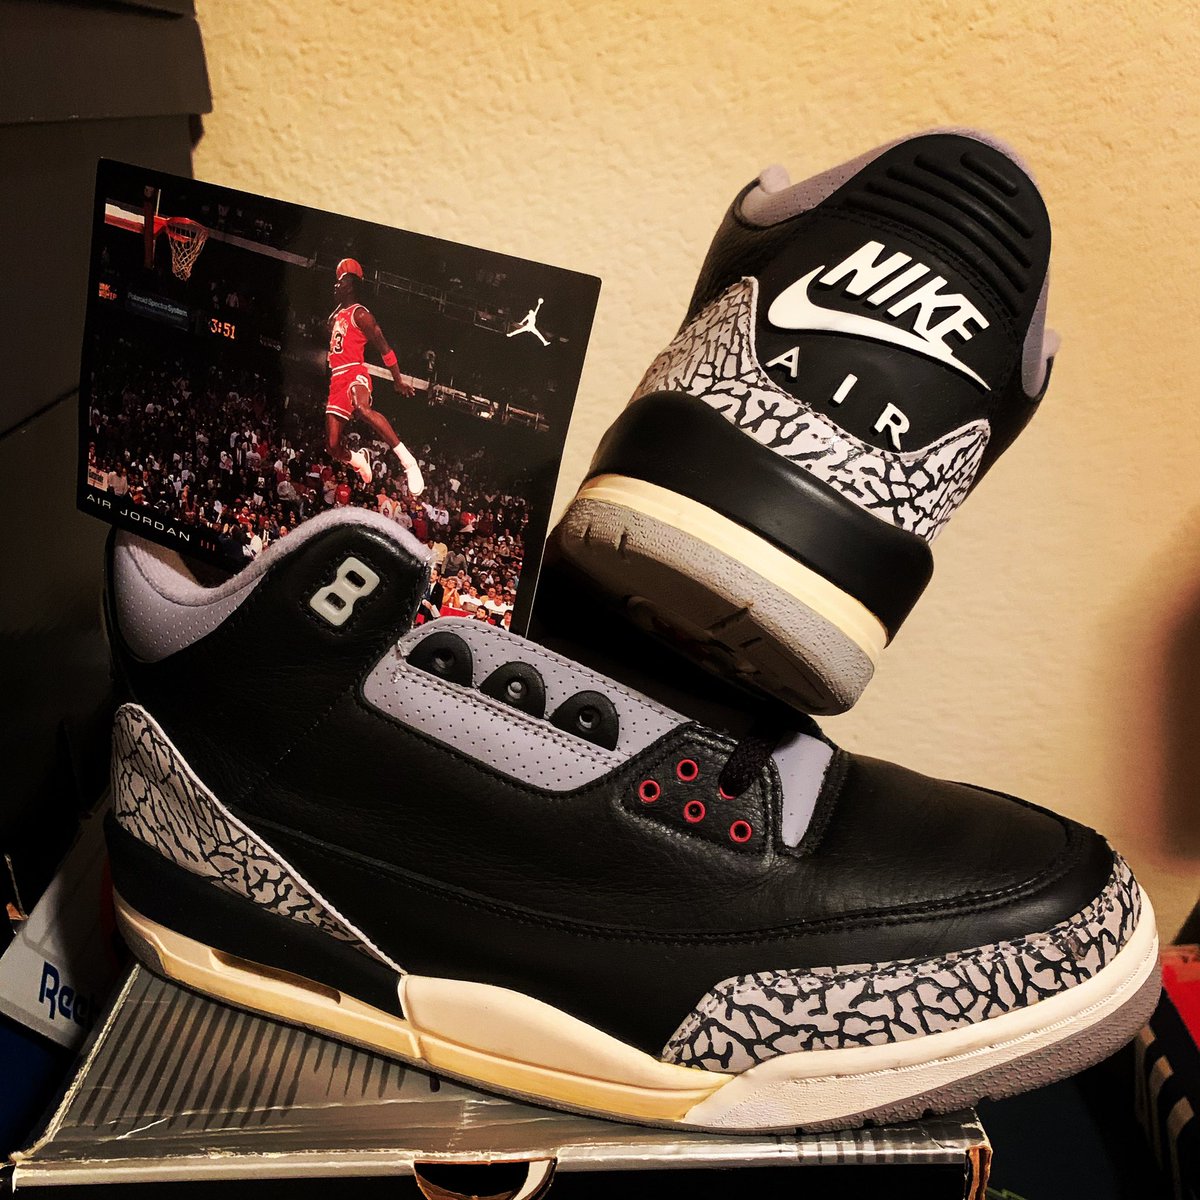 2001 Air Jordan III Retro #therealmysoletokeep #smyfh #nike #jumpman23 #retro #vintage #influencer #shoes #shoeporn #bayareagotsole #instyleshoes #kickgame #sneakers #modernnotoriety #recognize #solecollector #shotoniphone #greatness #Twitter #retro